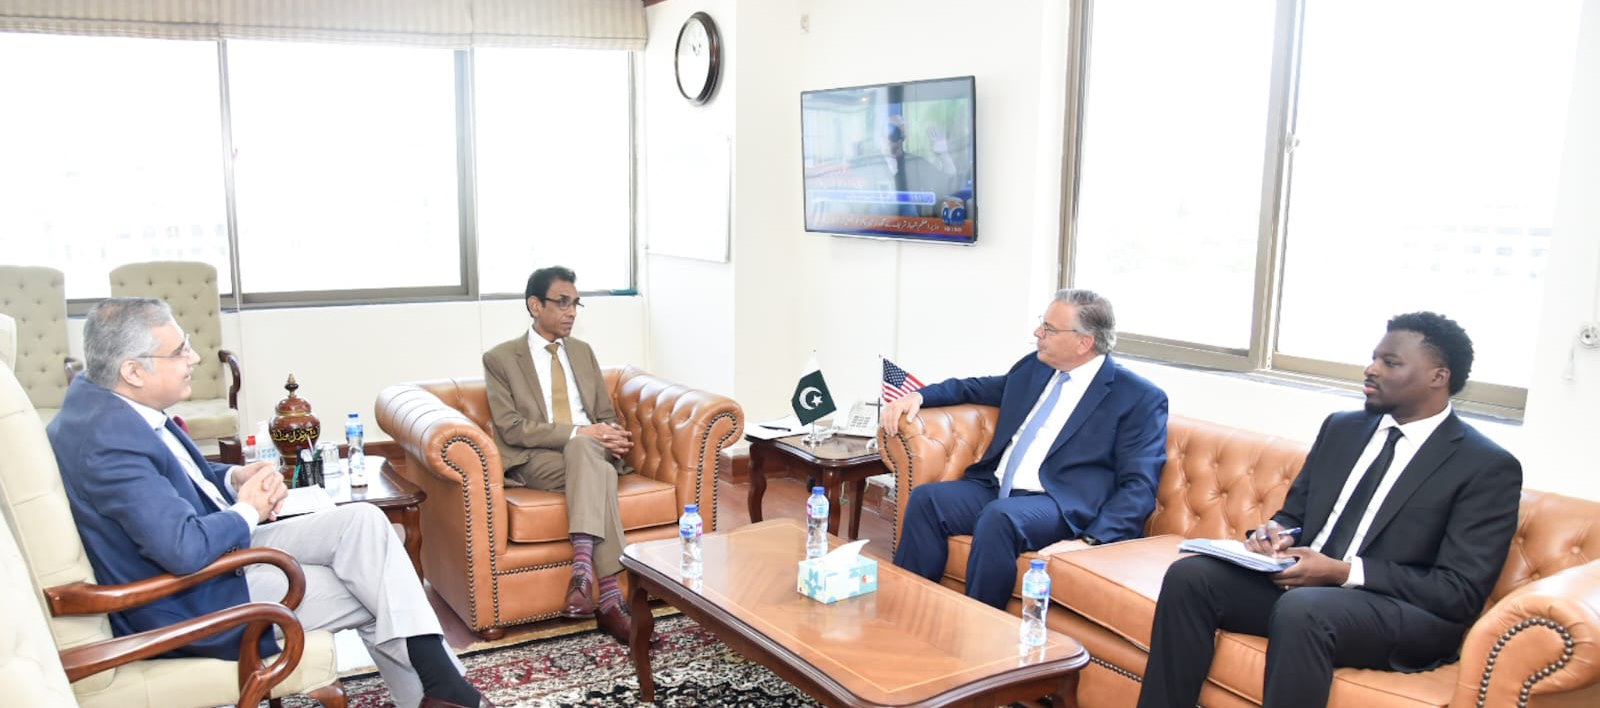 US Ambassador Donald Blome called on the Minister for Science and Technology Dr Khalid Maqbool Siddiqui in Islamabad.